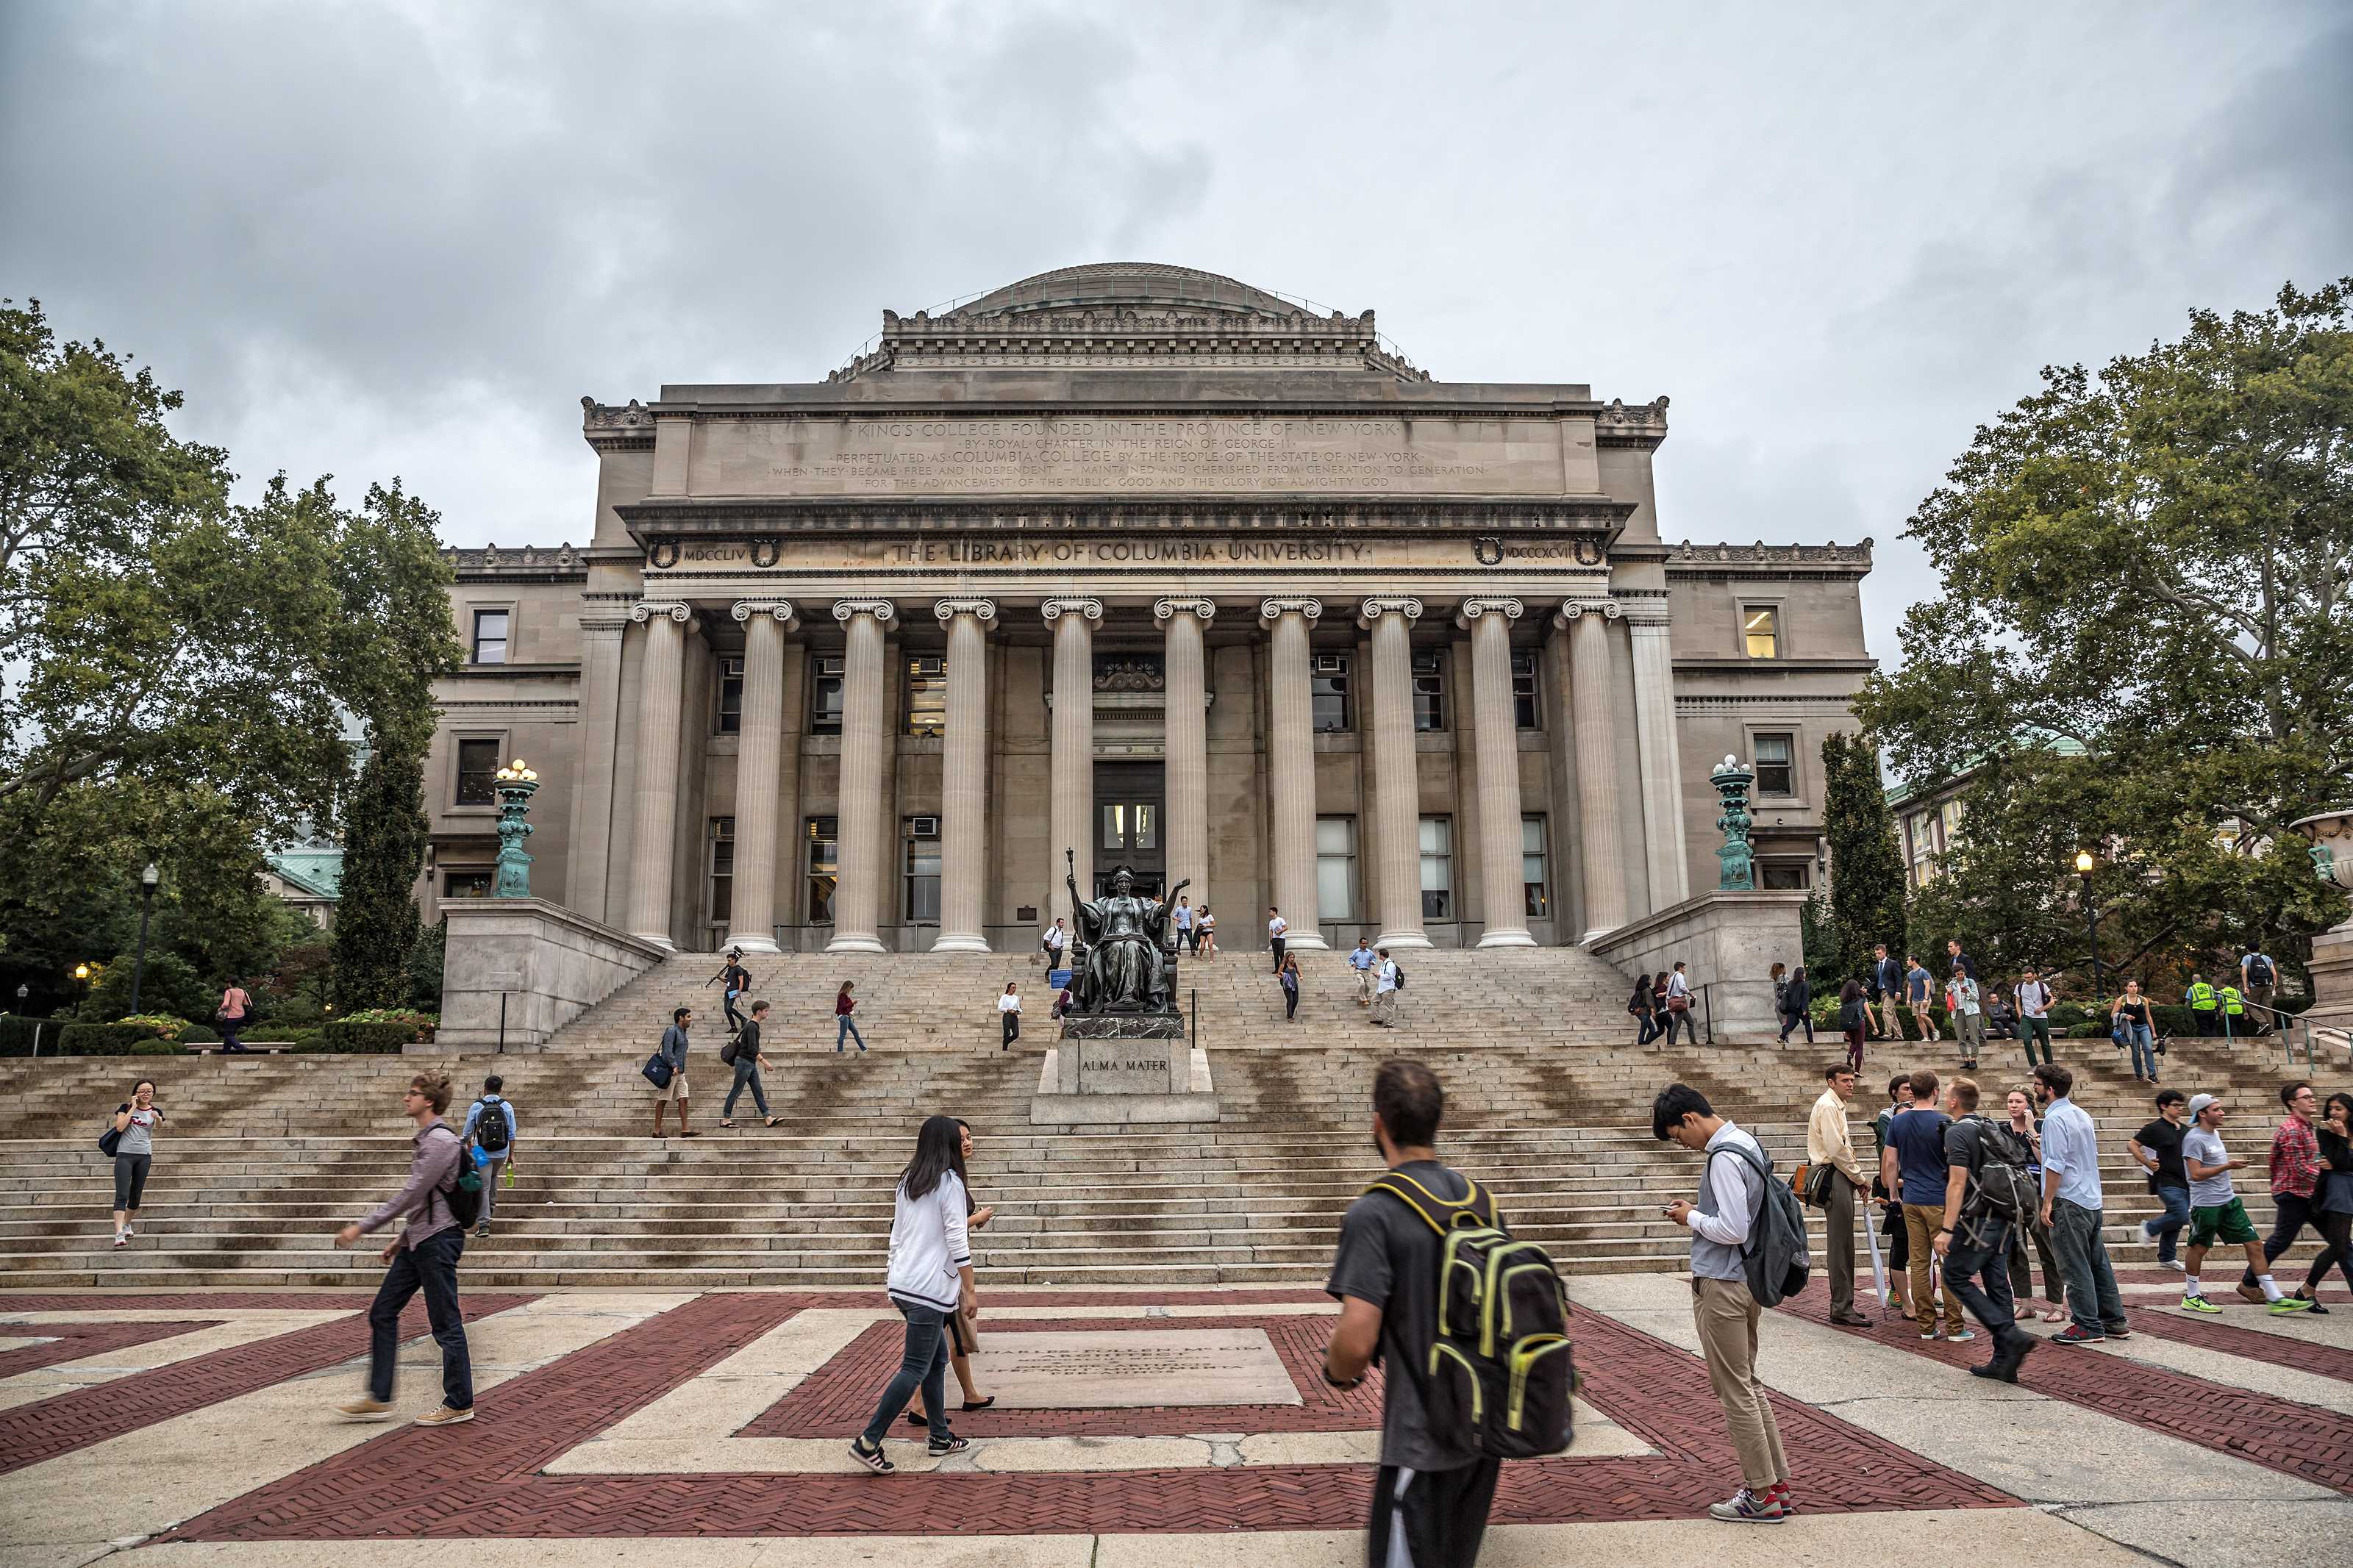 Immigration New Today: Columbia Students from Palestine File Discrimination Claim With Feds